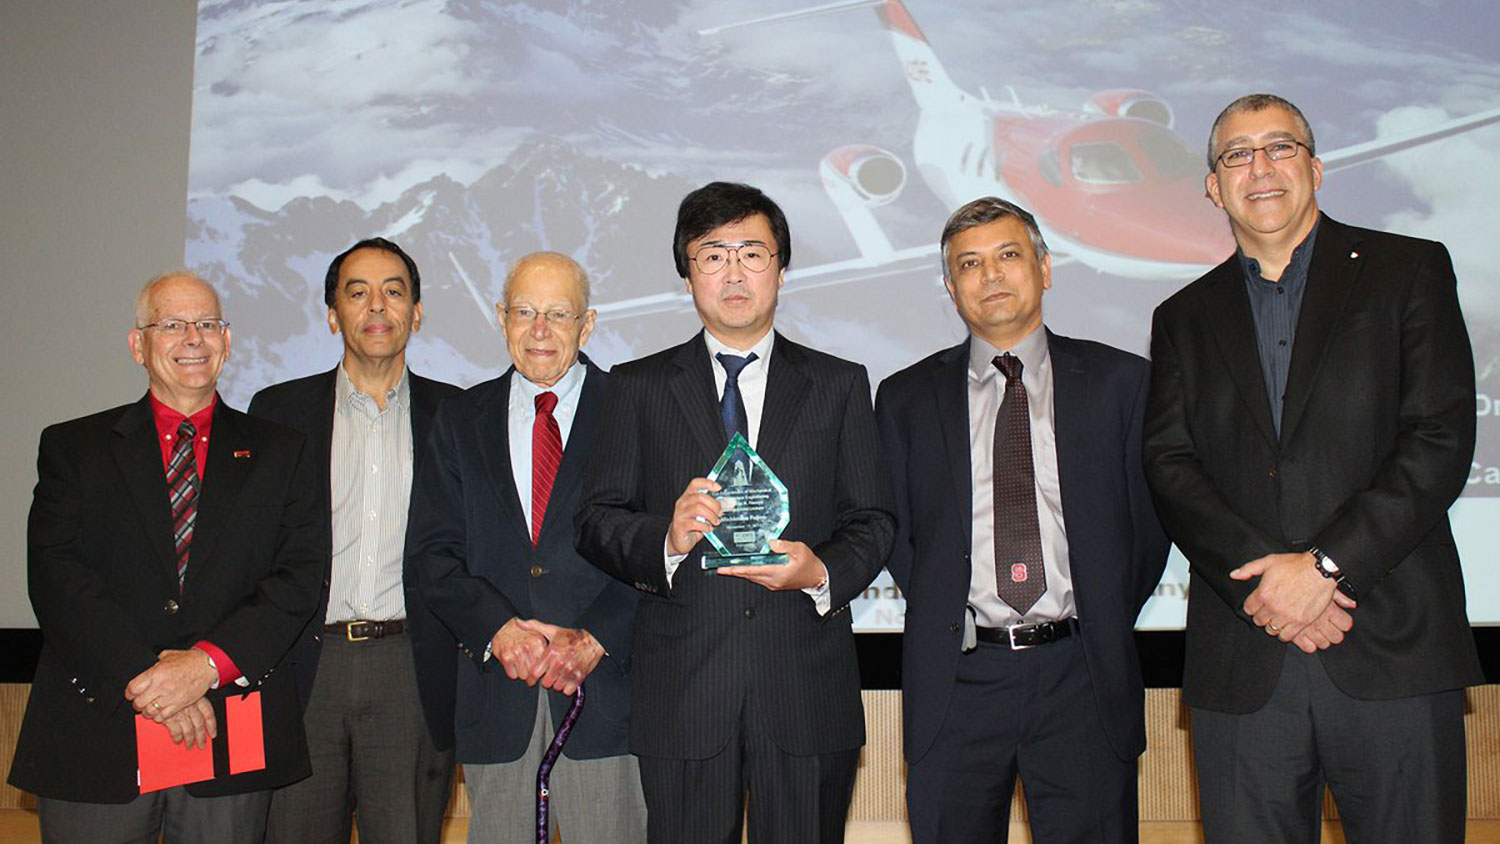 From left, Dr. Richard Gould, RJ Reynolds Professor in the Department of Mechanical and Aerospace Engineering (MAE), Dr. Mohammed Zikry, Zan Prevost Smith Professor in MAE; Dr. Hassan A. Hassan, professor in MAE; Michimasa Fujino; Dr. Srinath Ekkad, professor and department head in MAE; and Dr. Basil Hassan, senior manager at Sandia National Laboratories and son of Dr. Hassan Hassan.